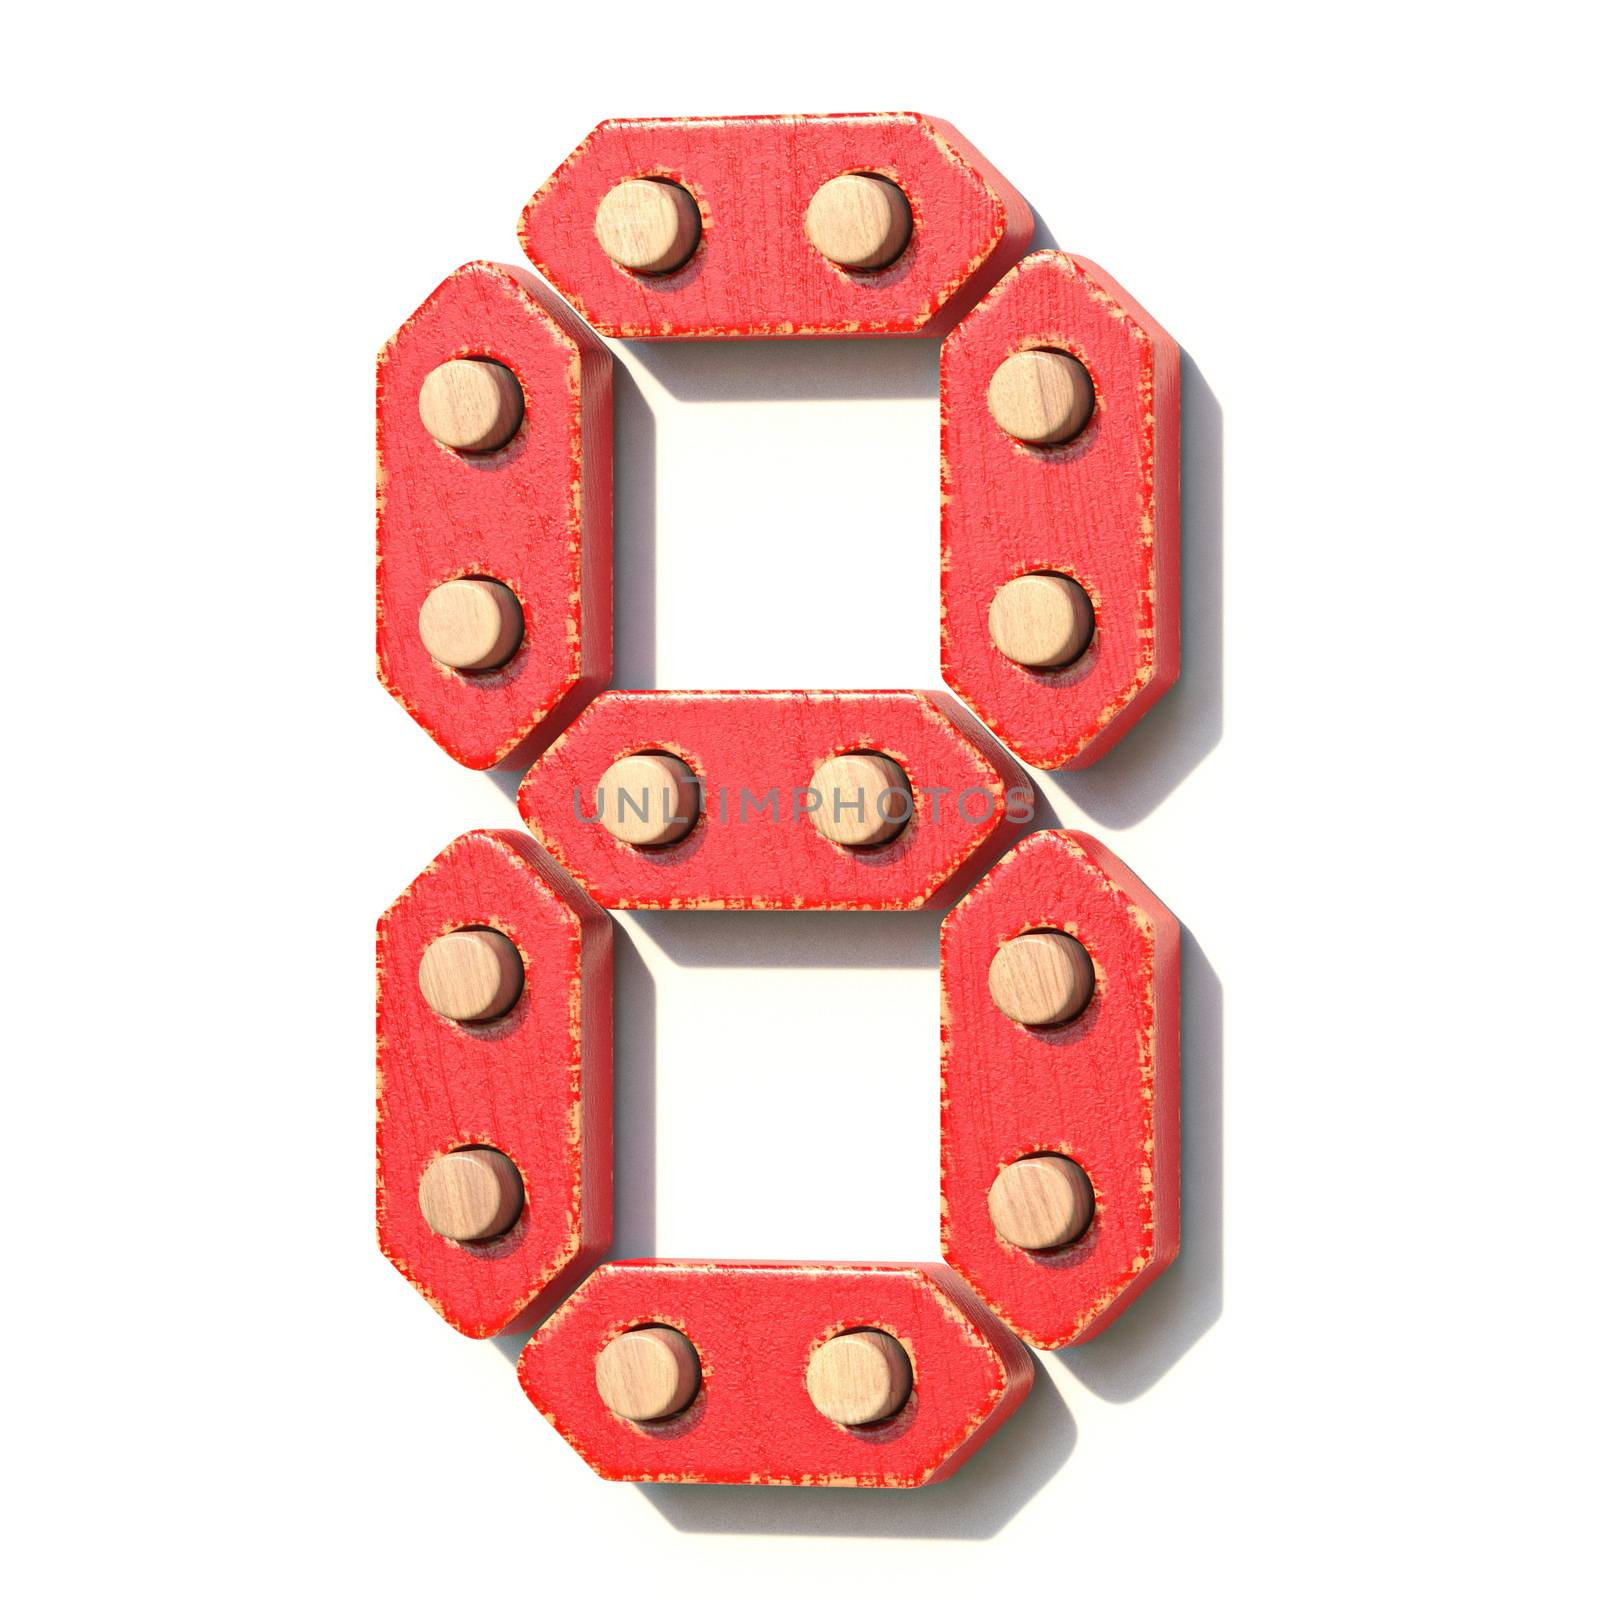 Wooden toy red digital number 8 EIGHT 3D by djmilic